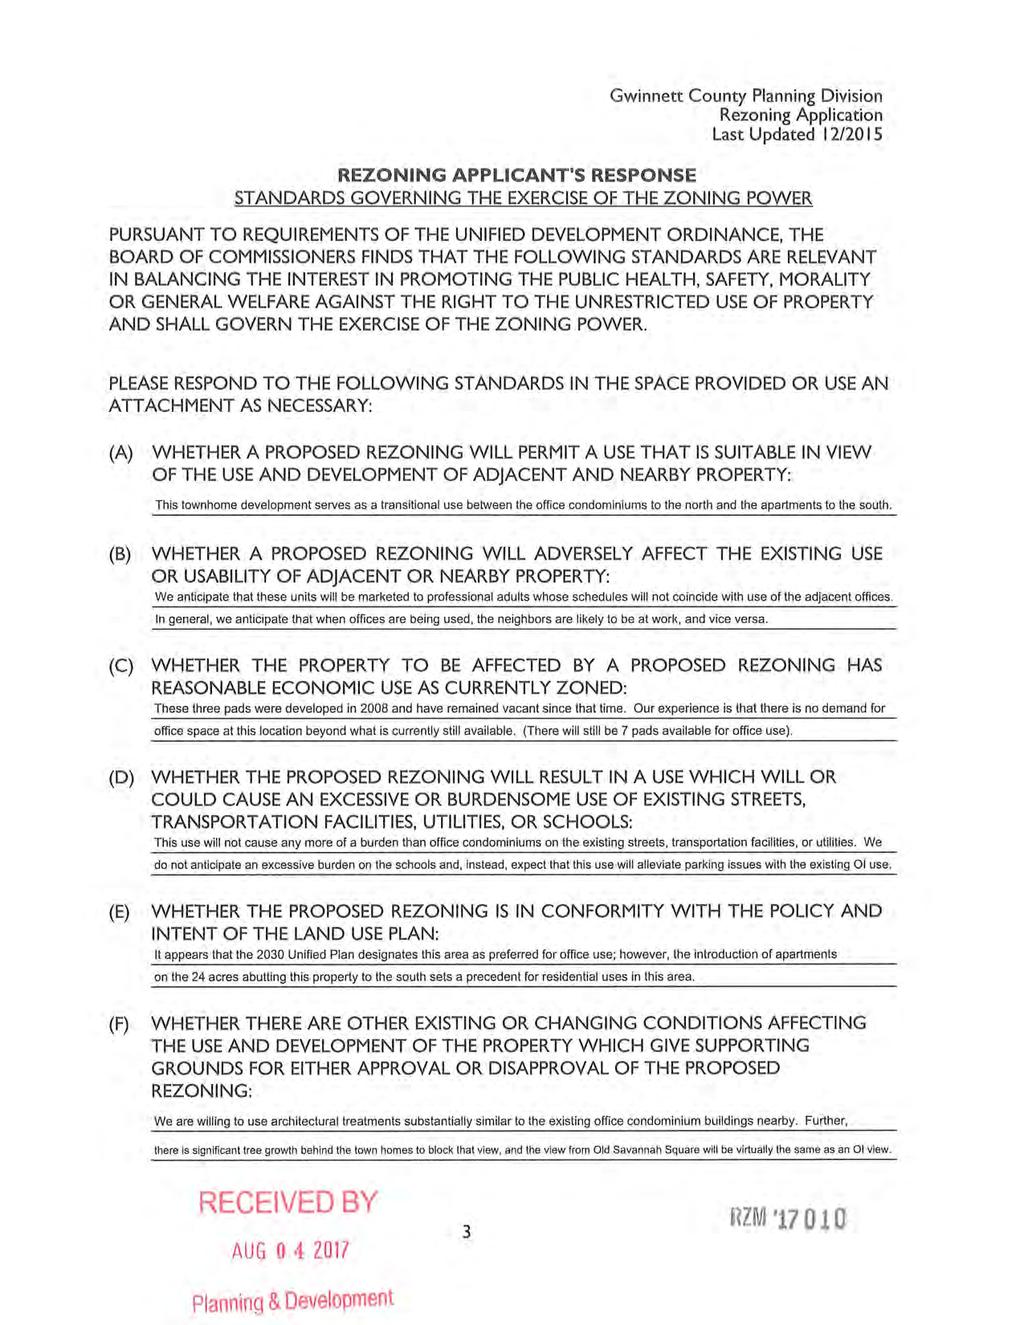 Last Updated I 2/20 I 5 REZONING APPLICANT 'S RES PO NSE STANDARDS GOVERNING THE EXERCISE OF THE ZONING POWER PURSUANT TO REQUIREMENTS OF THE UNIFIED DEVELOPMENT ORDINANCE, THE BOARD OF COMMISSIONERS